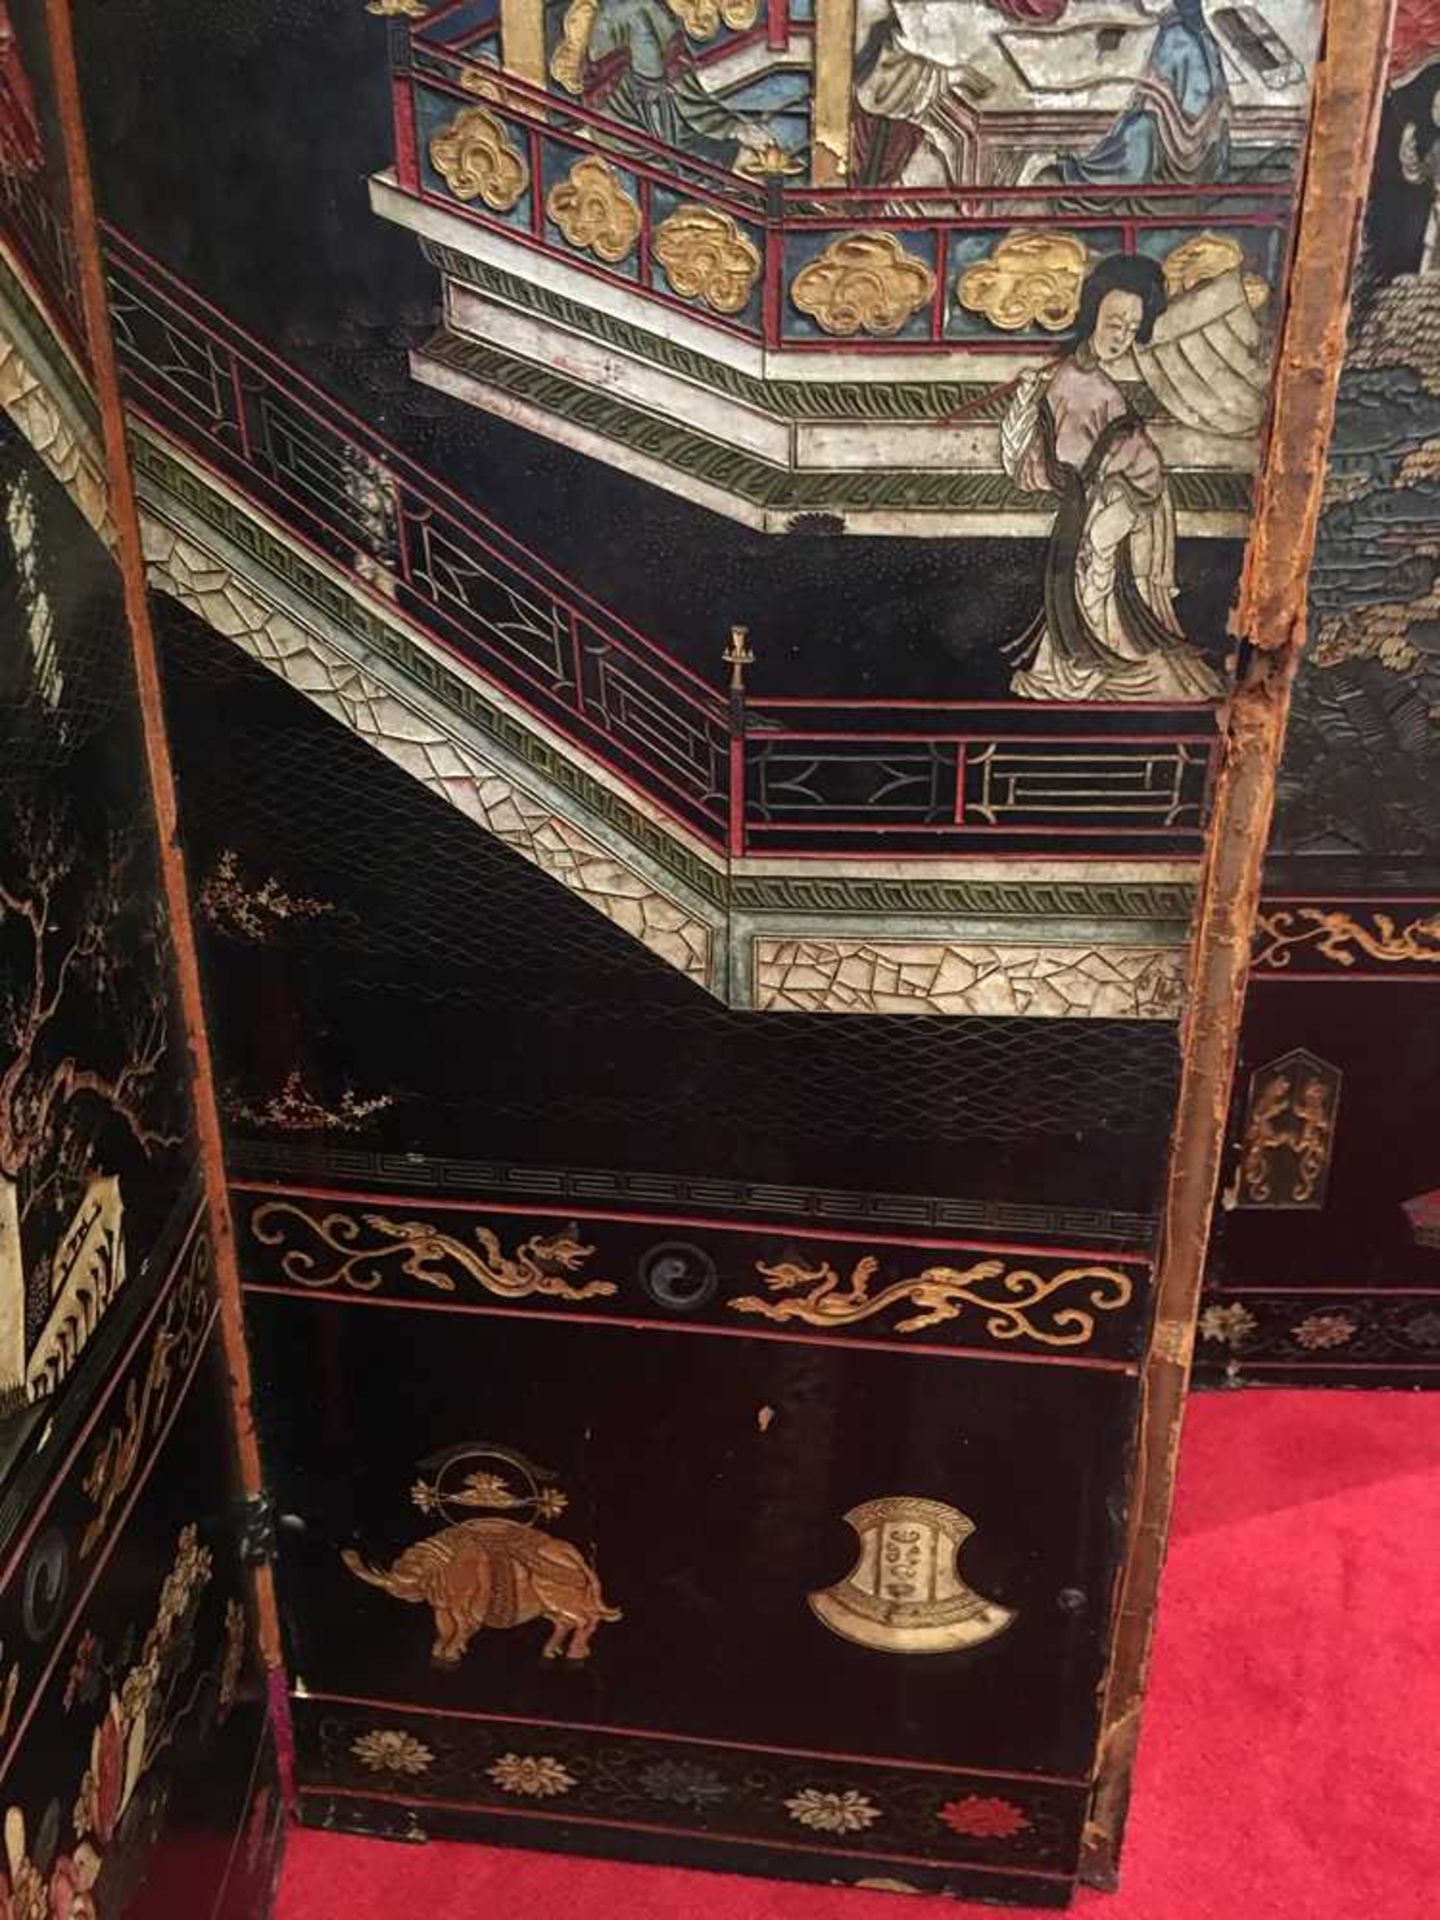 A CHINESE COROMANDEL BLACK LACQUER TWELVE-PANEL SCREEN QING DYNASTY, 18TH CENTURY - Image 20 of 72